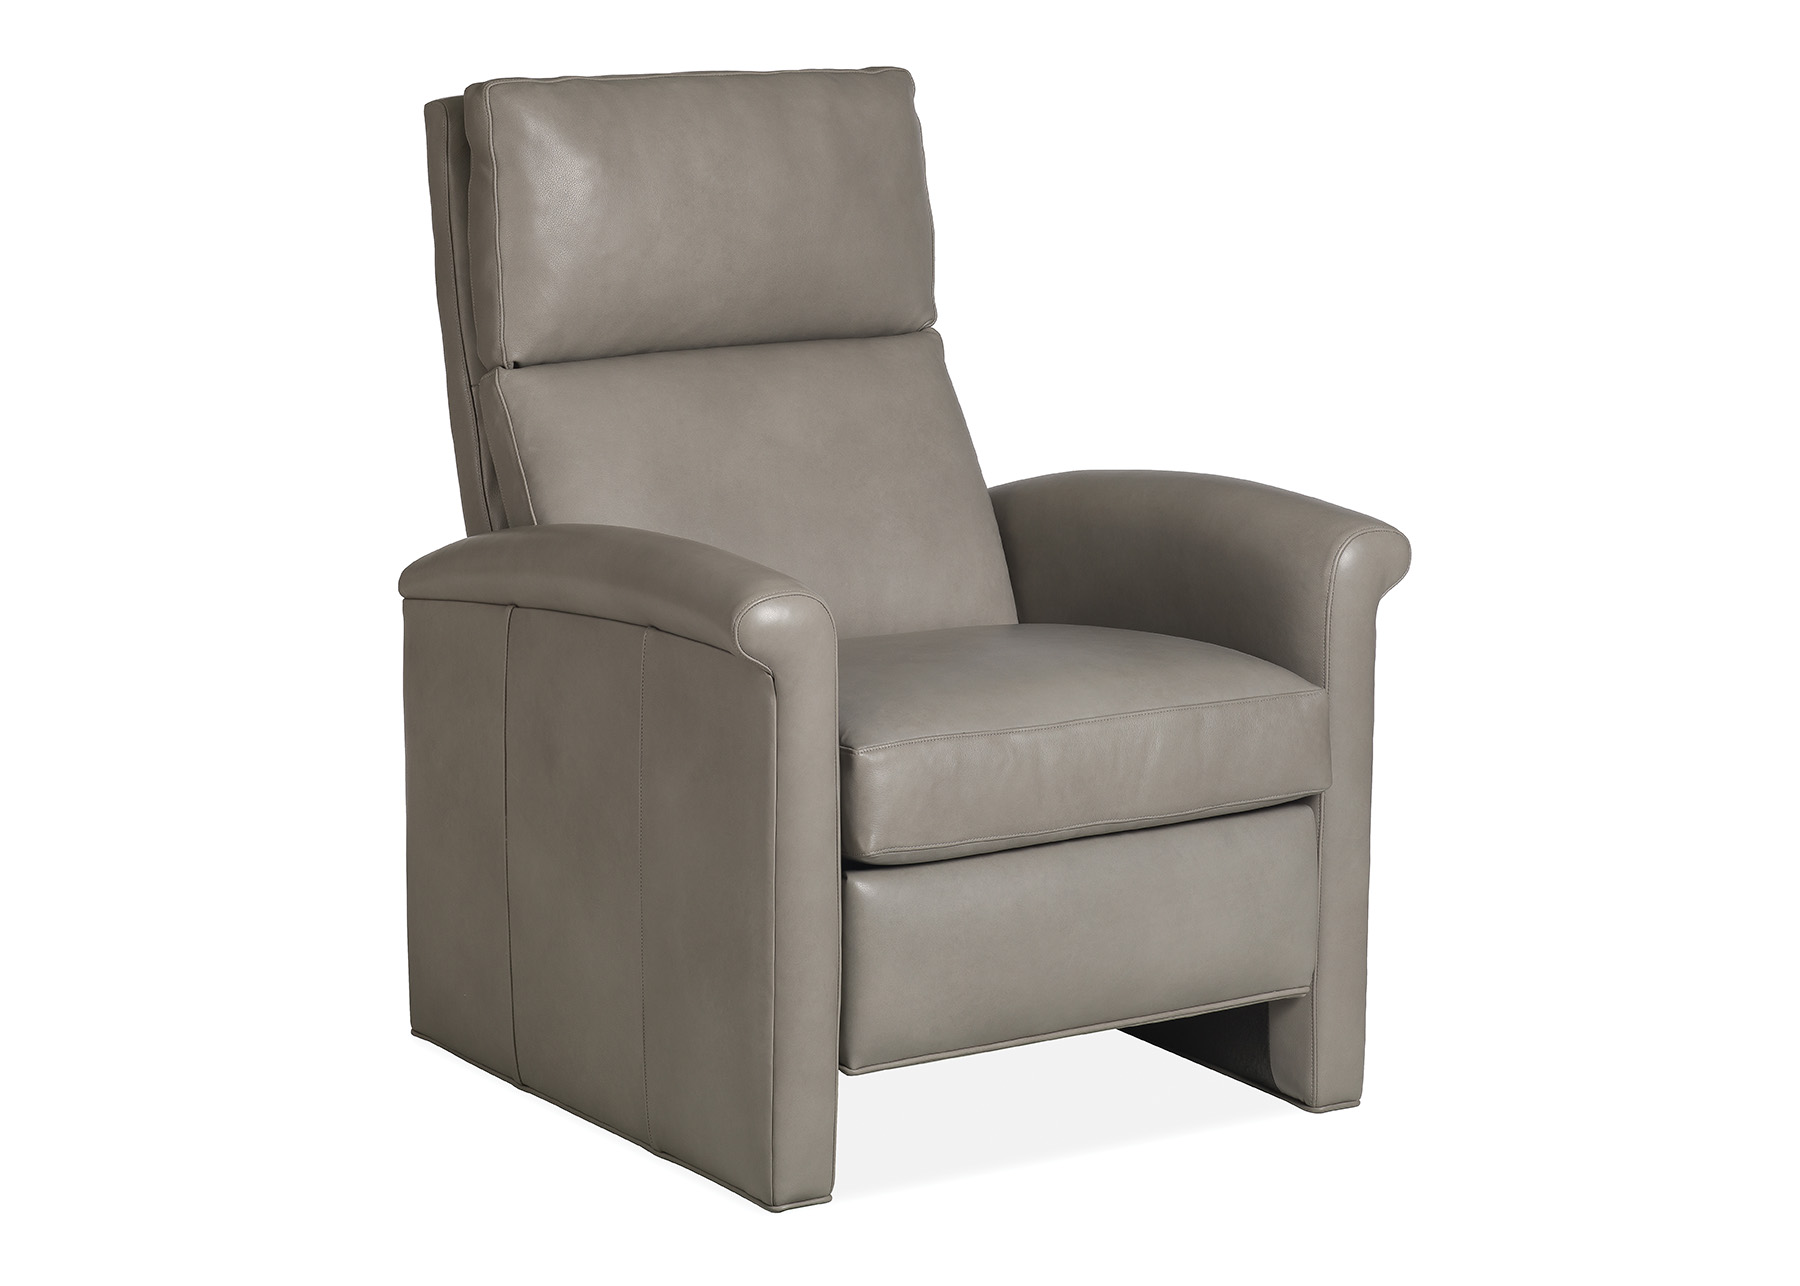 CALI POWER RECLINER WITH BATTERY